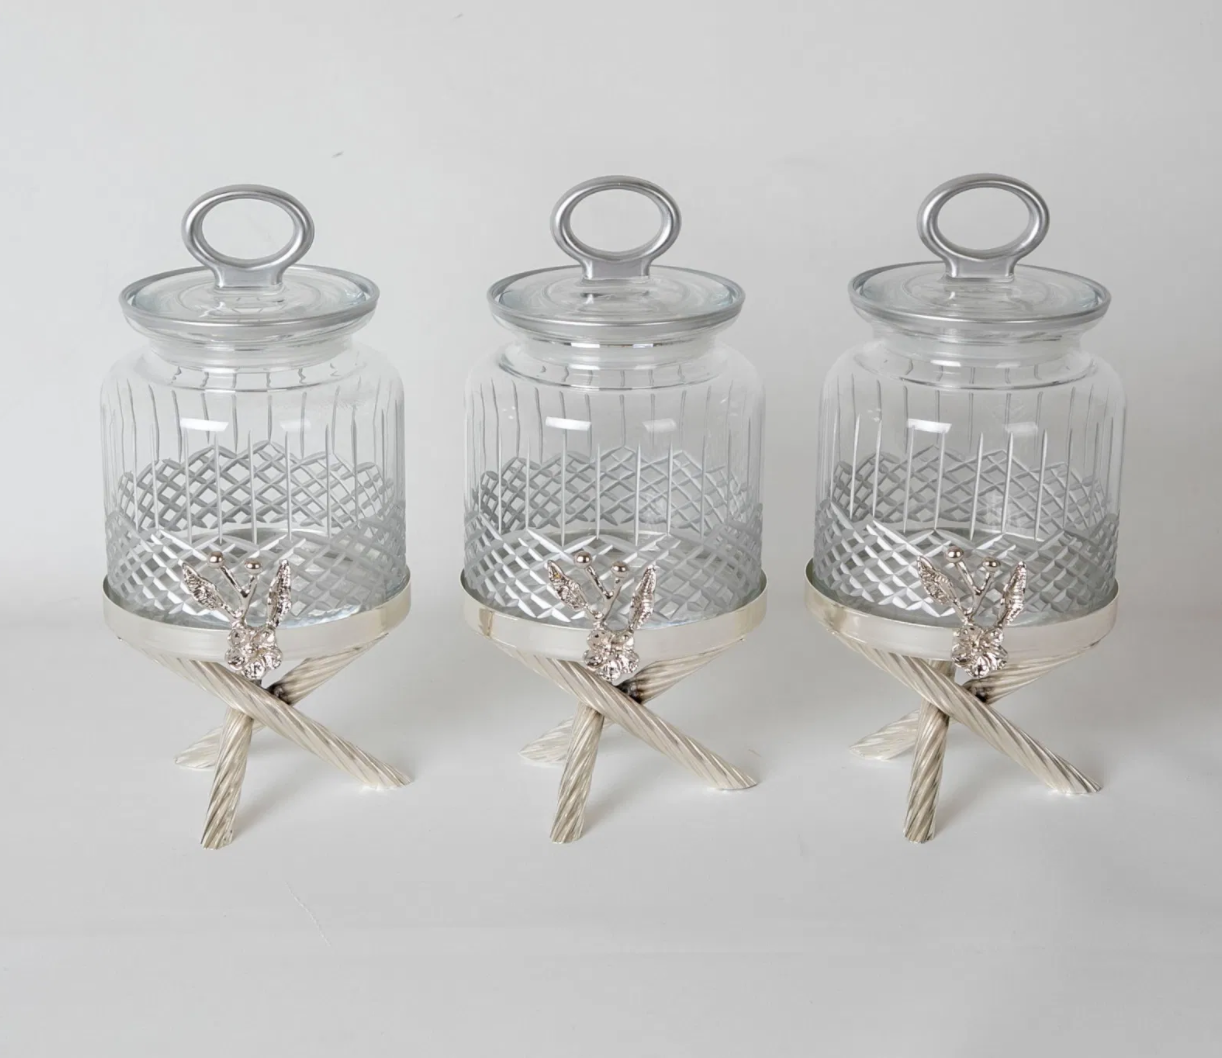 Silver Floral Canister with Metal Stand (3 Pieces Set)